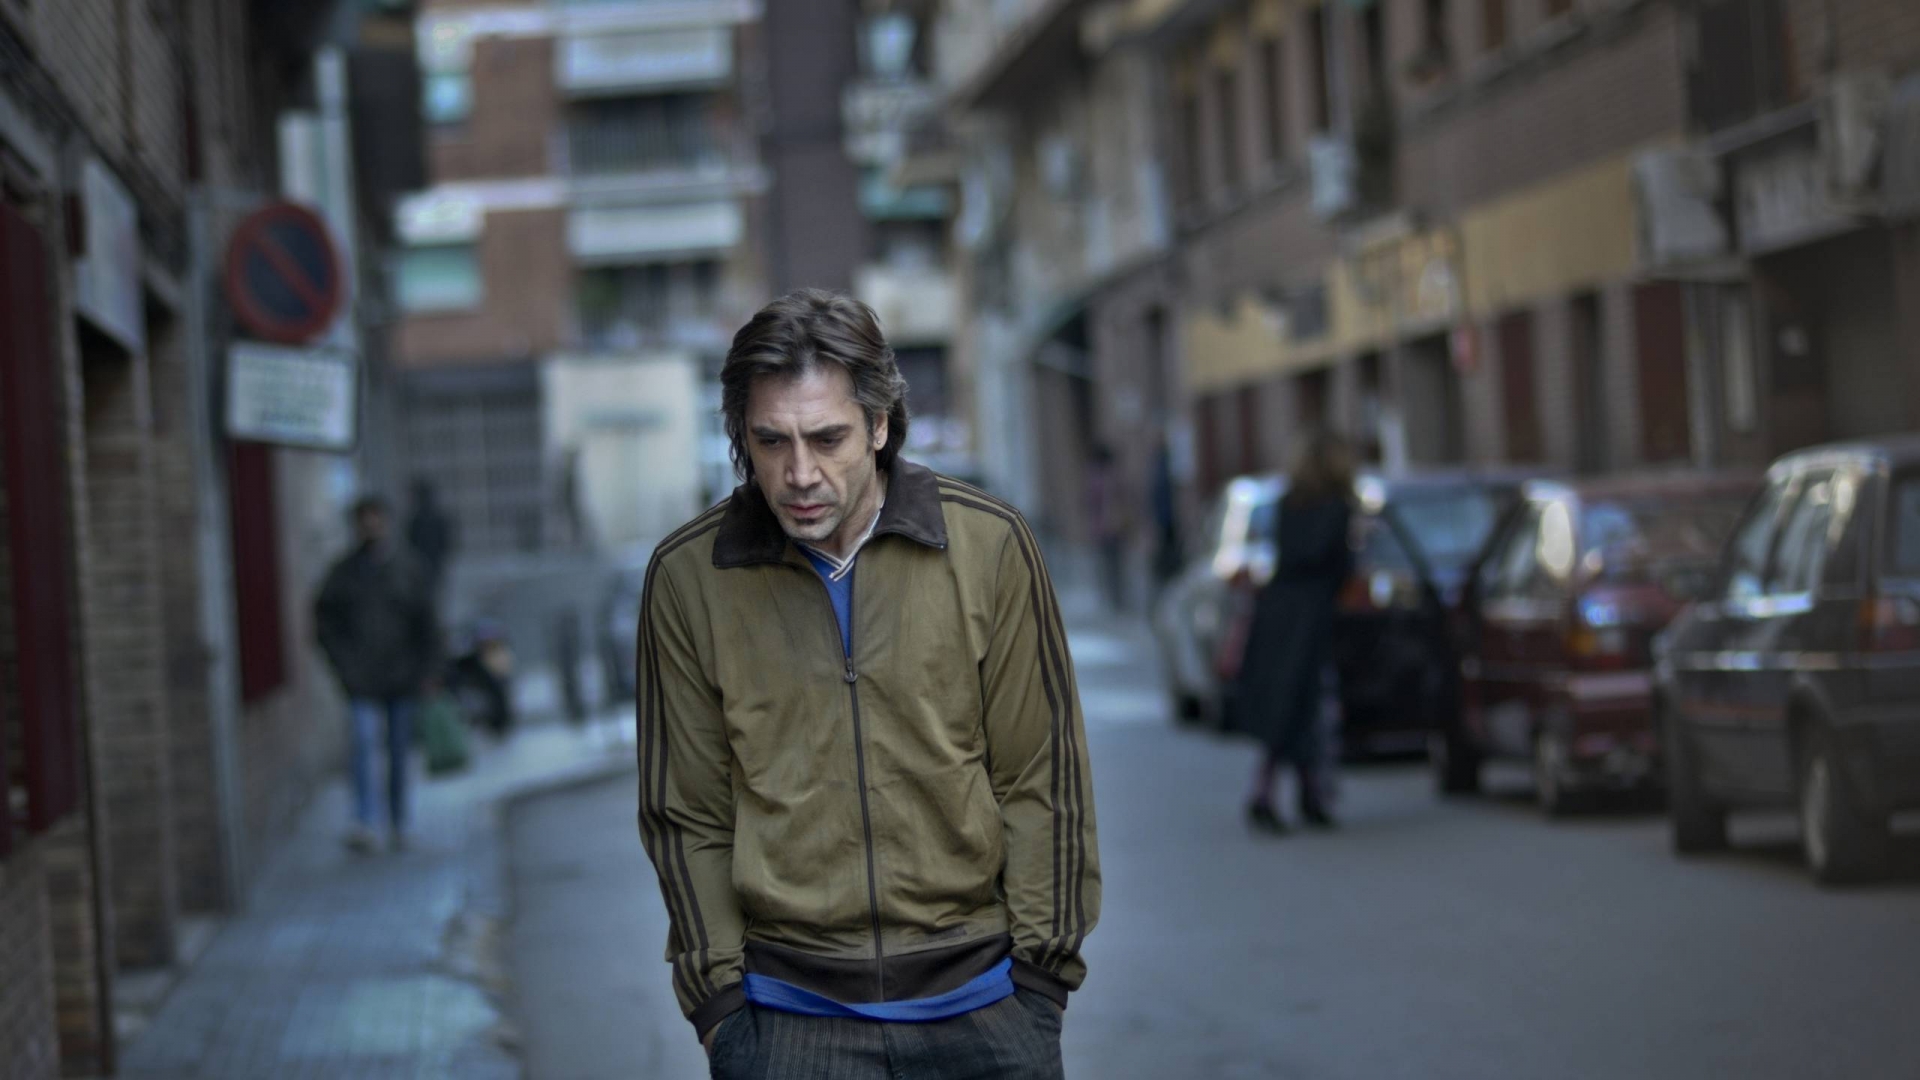 Javier Bardem Lonely for 1920 x 1080 HDTV 1080p resolution